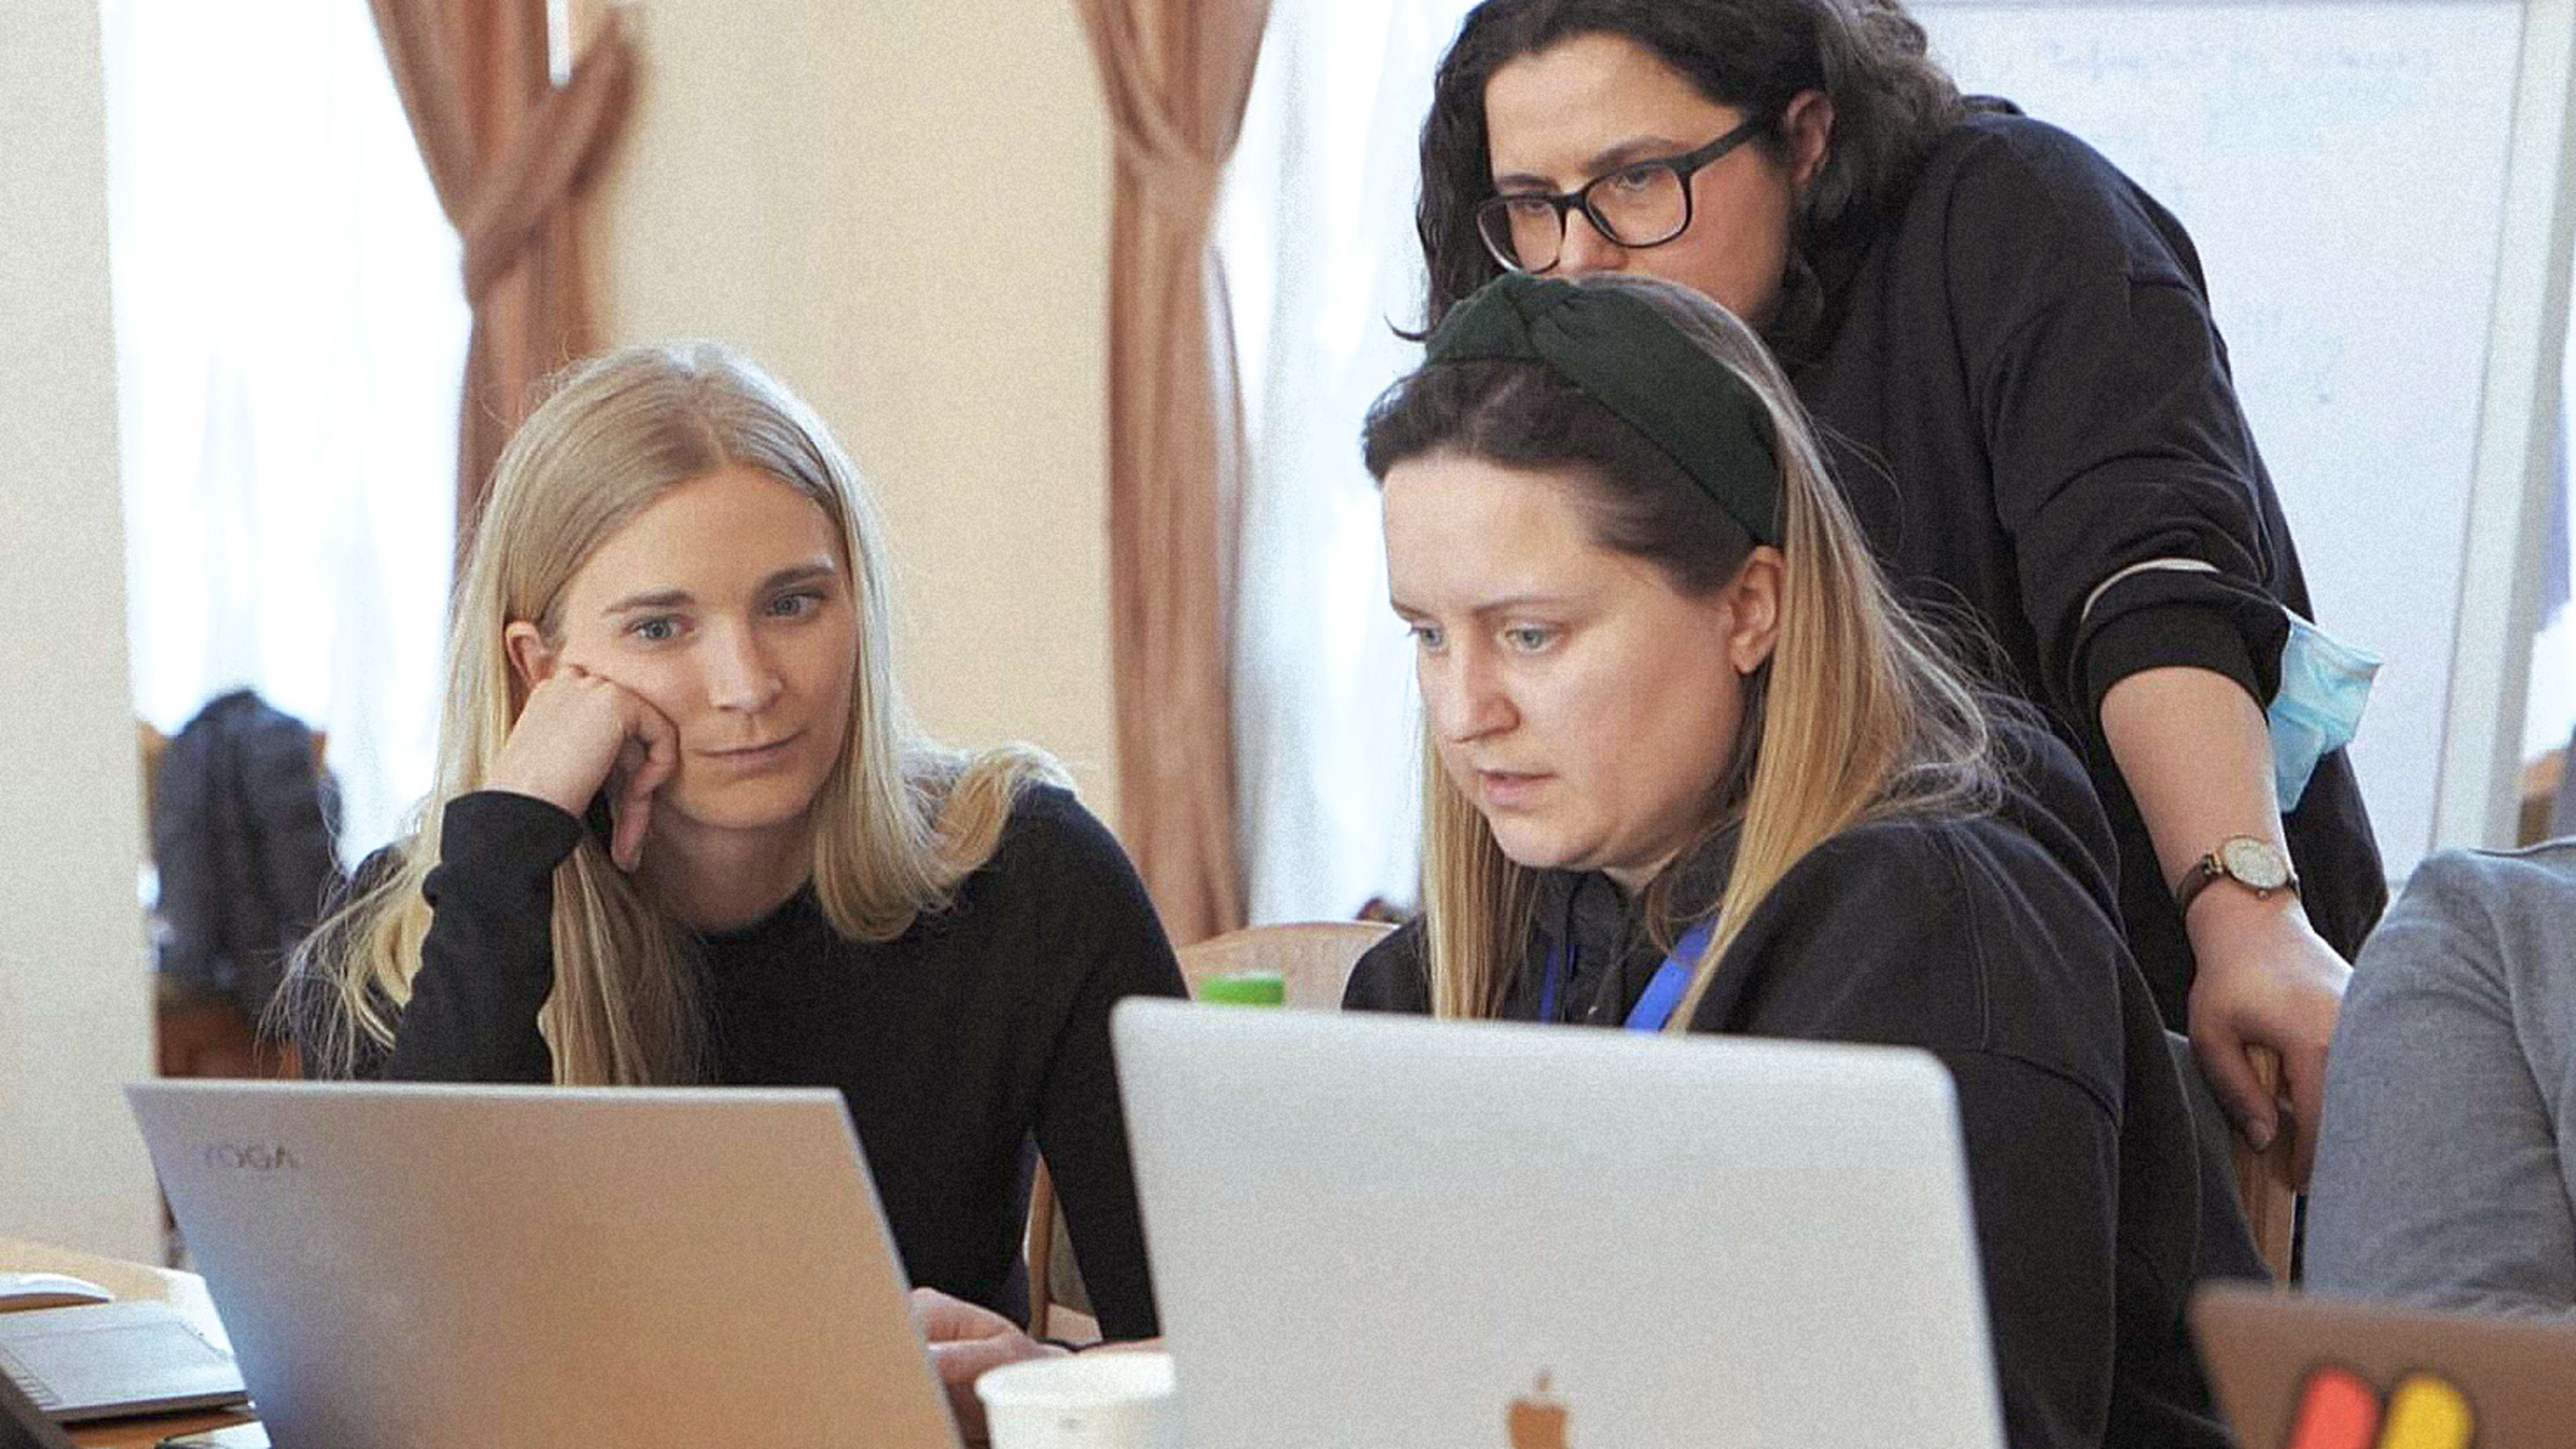 How tech volunteers helped build out Ukrainian refugee centers